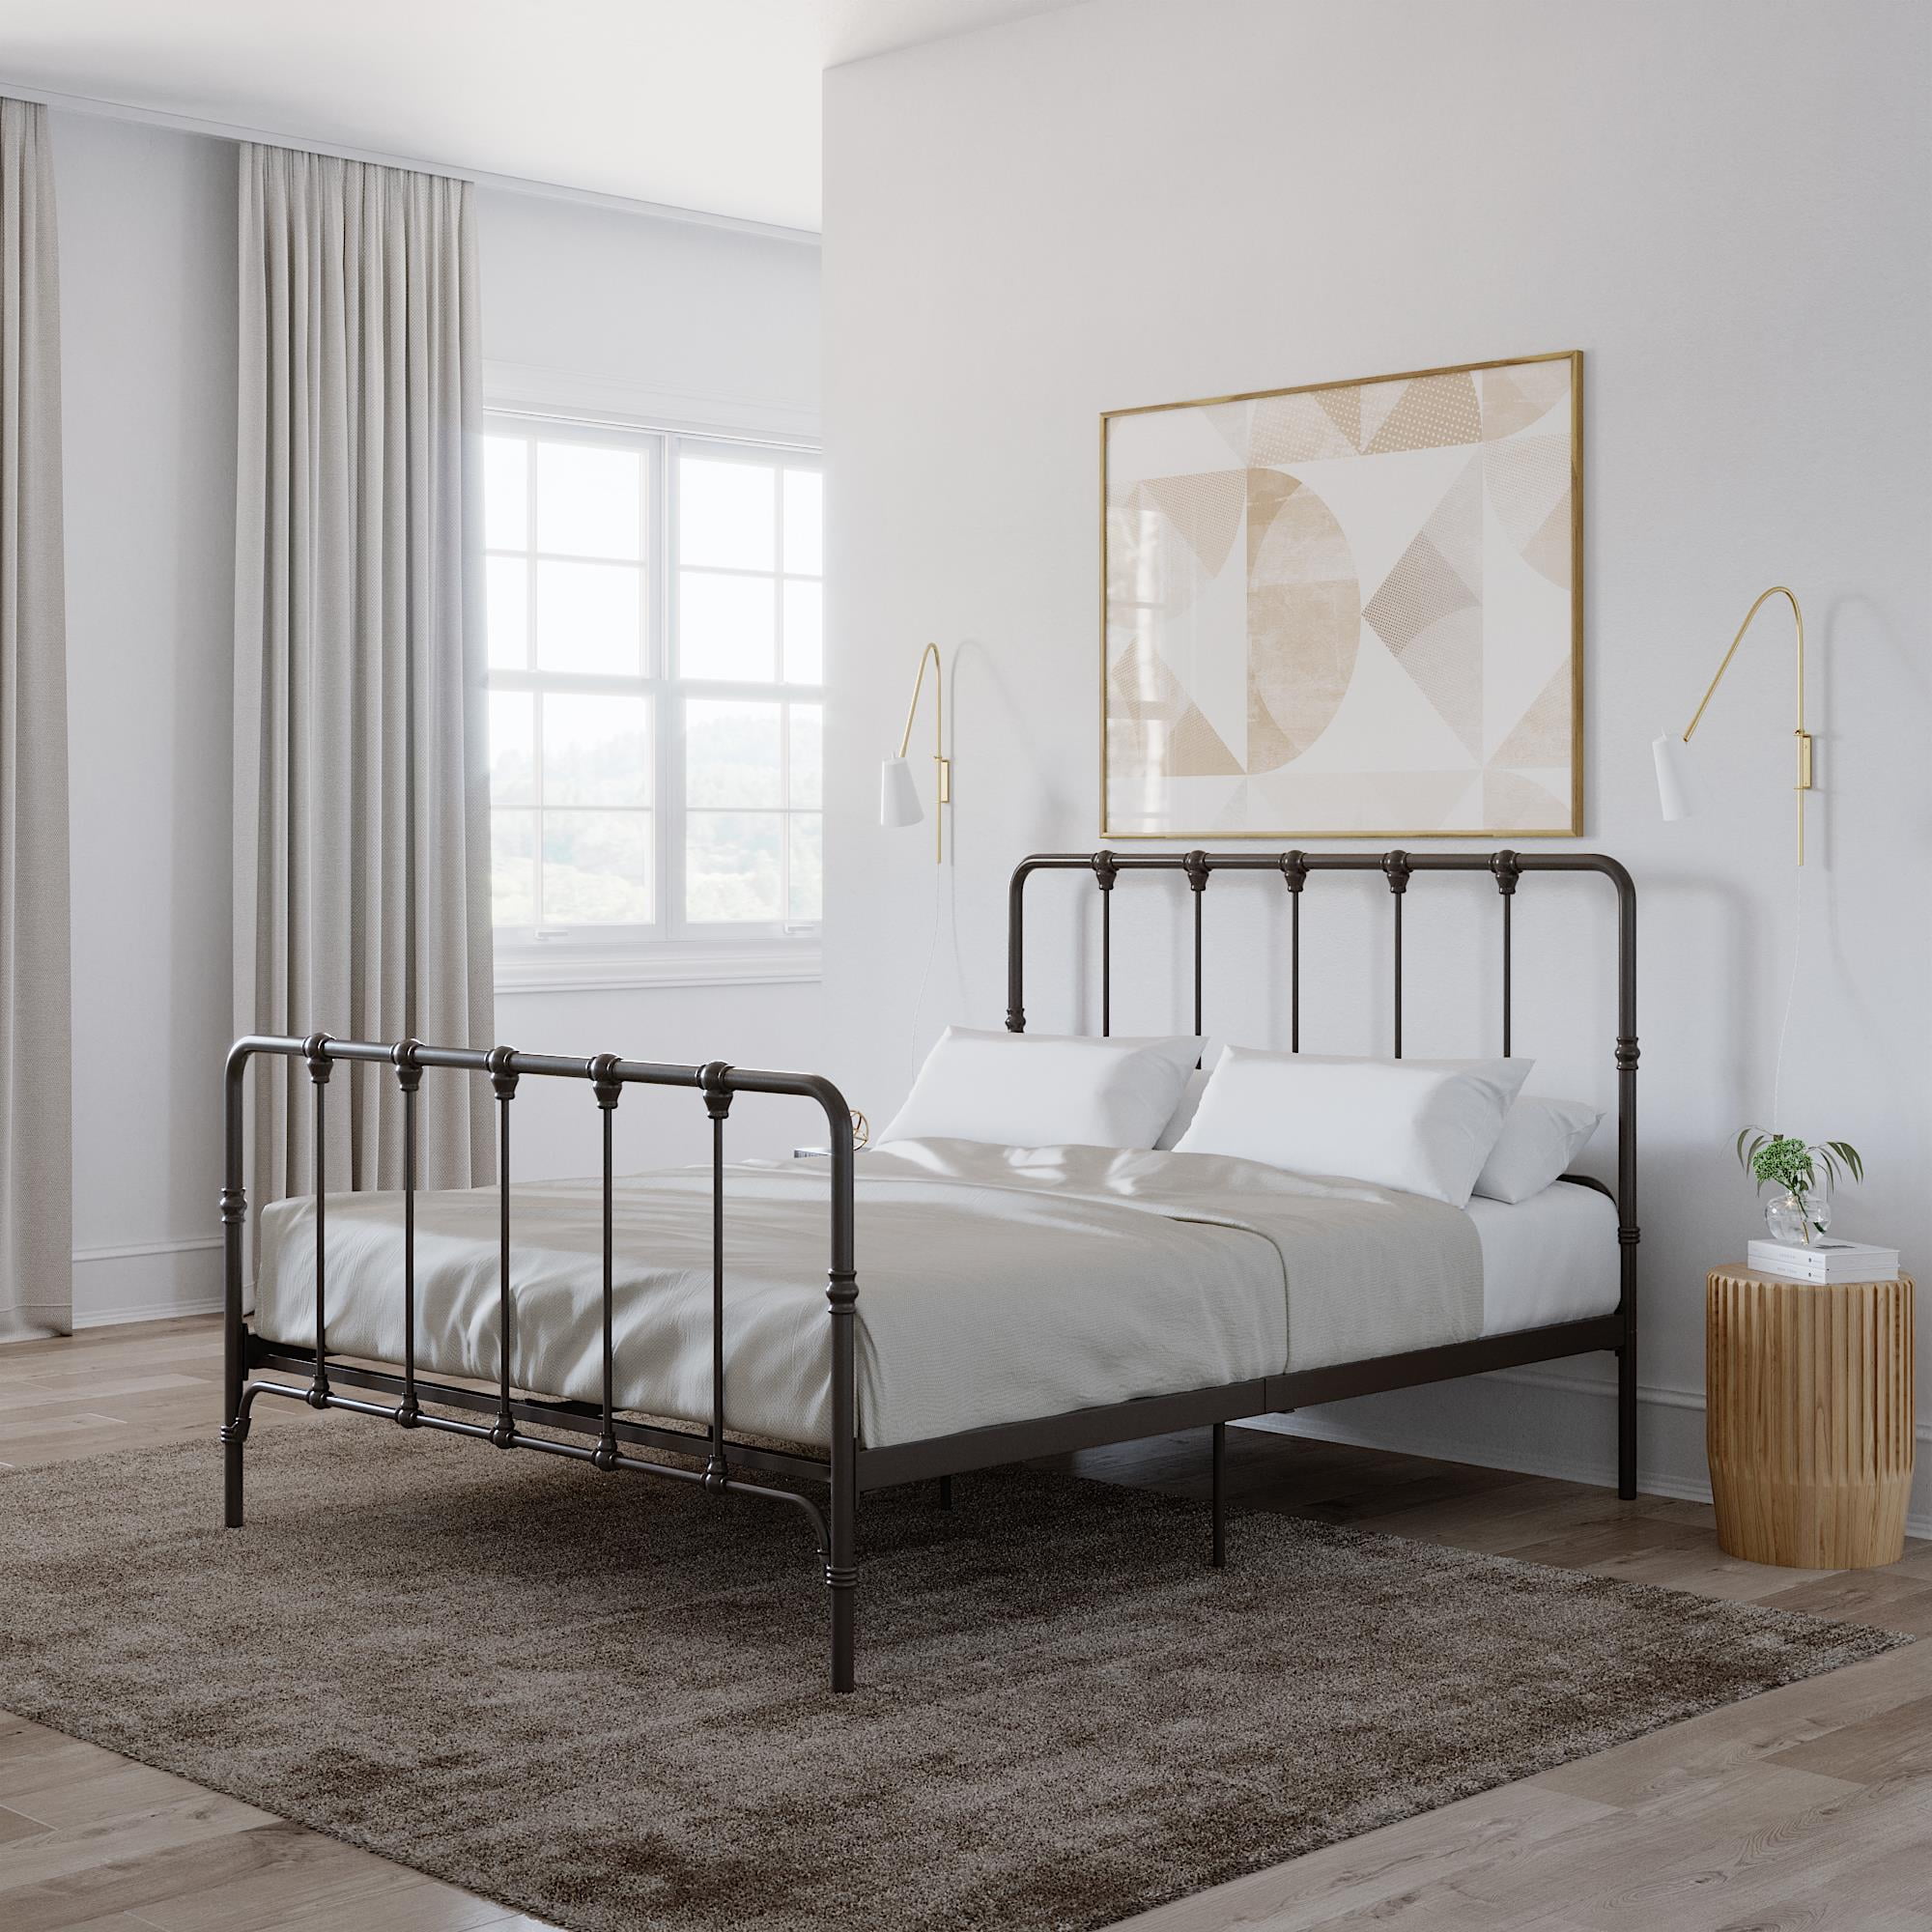 Mainstays Farmhouse Metal Bed, Queen Size Bed Frame, Grey - Walmart.com